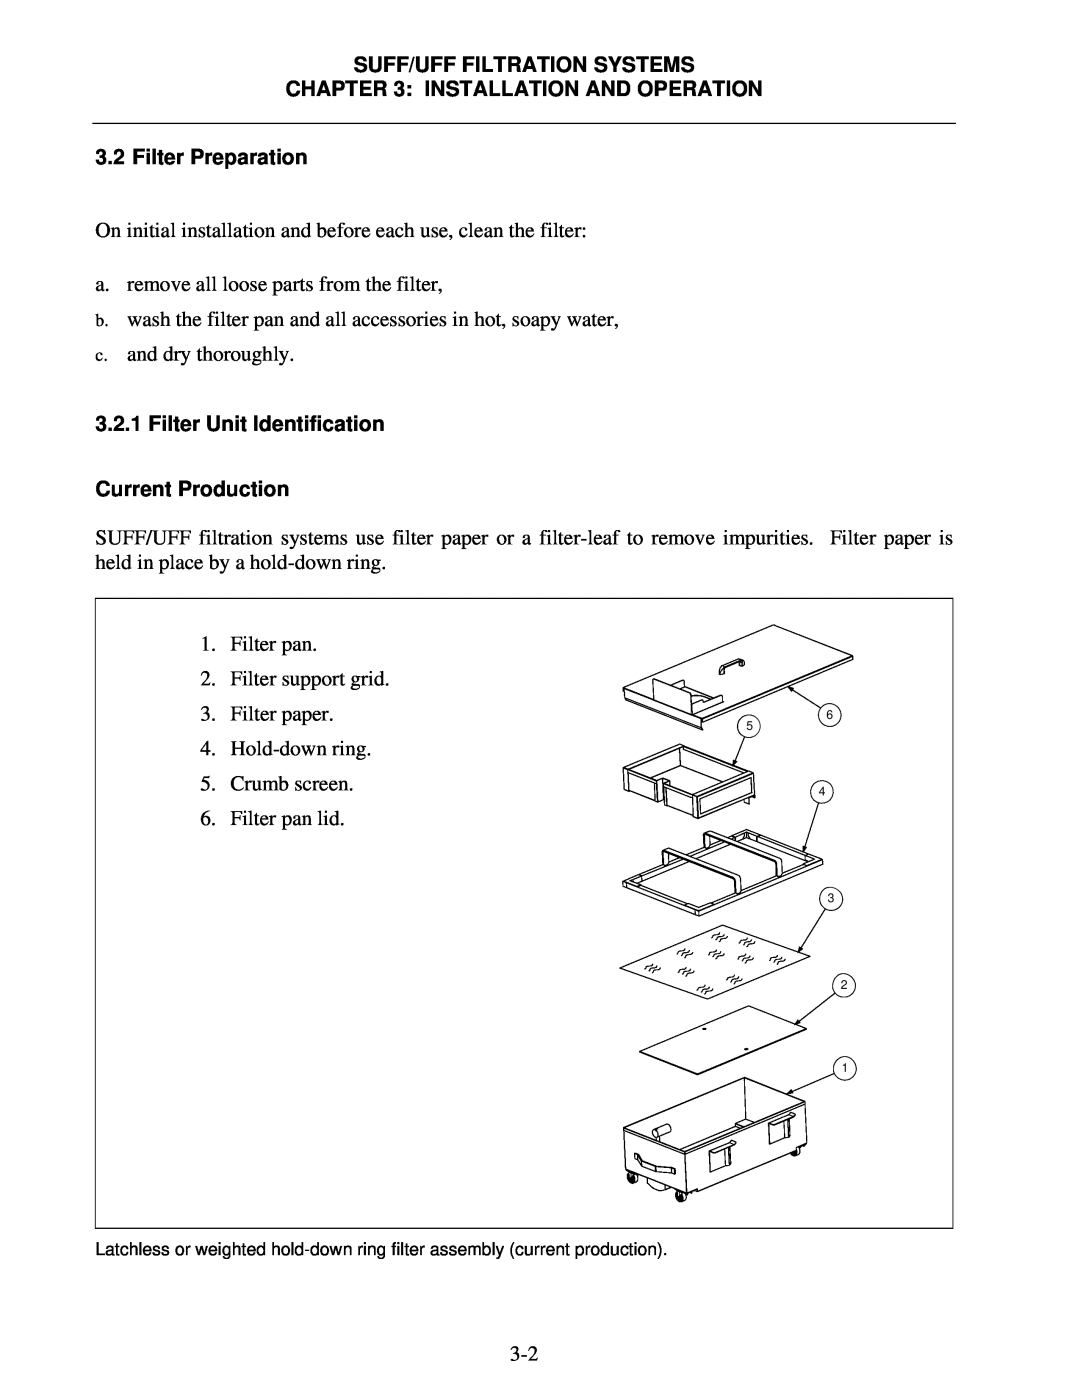 Frymaster 8195809 operation manual Suff/Uff Filtration Systems Installation And Operation, Filter Preparation 